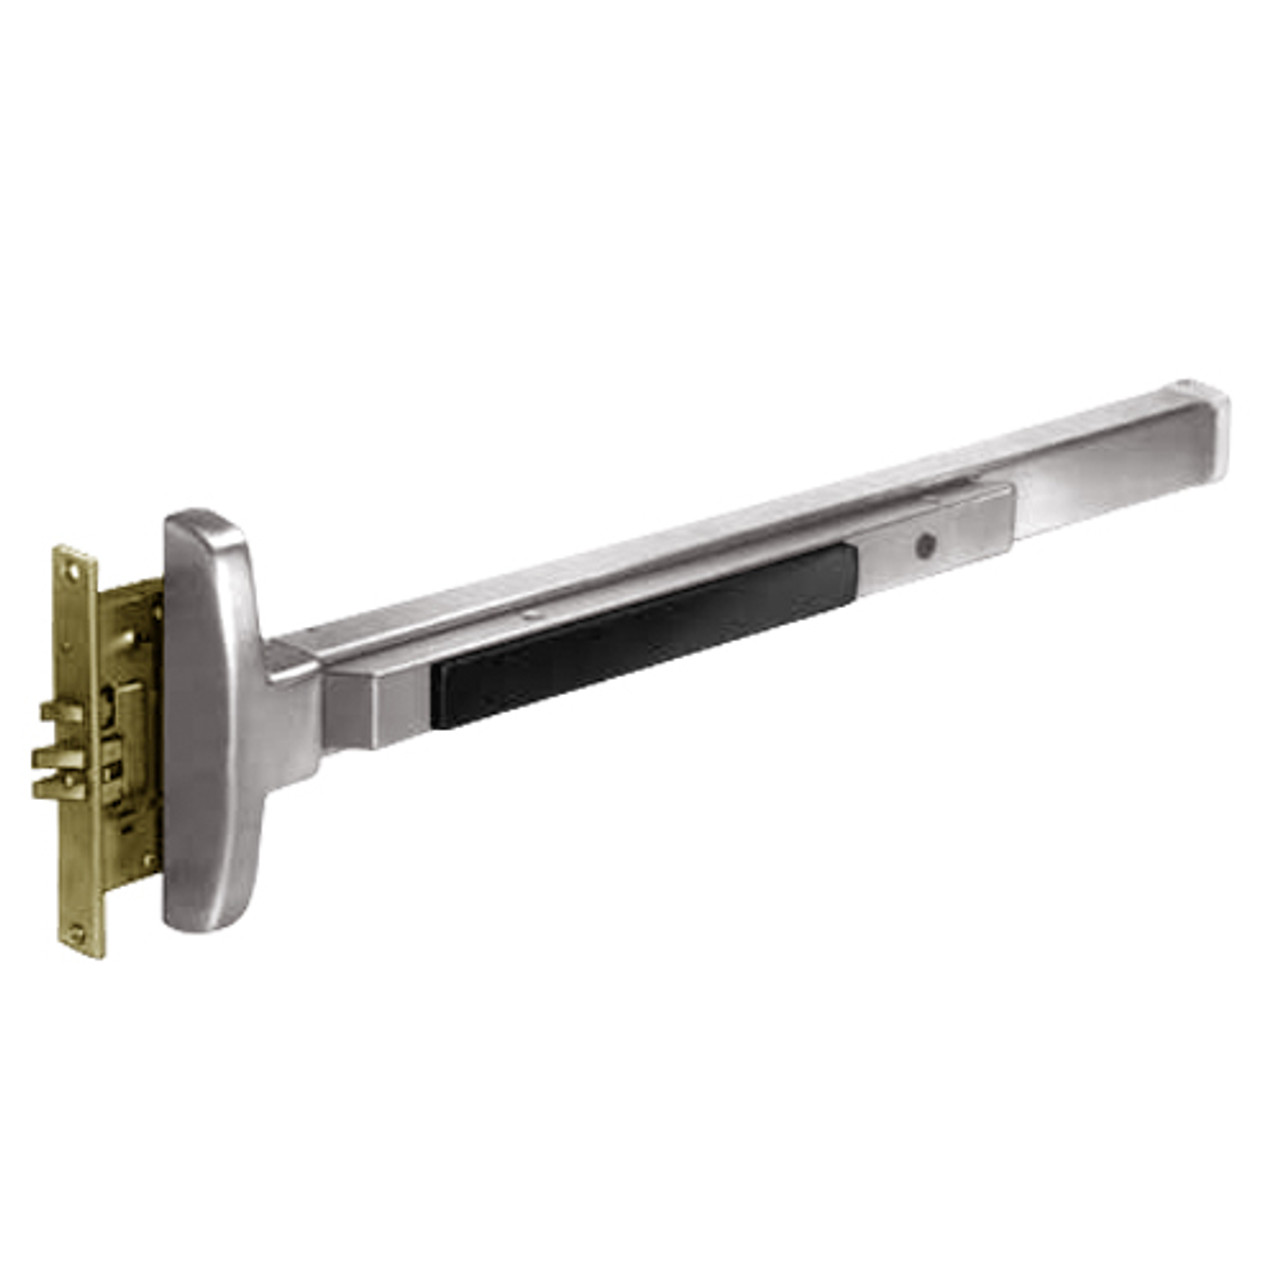 8310E-RHR-32 Sargent 80 Series Exit Only Narrow Stile Mortise Lock Exit Device in Brass